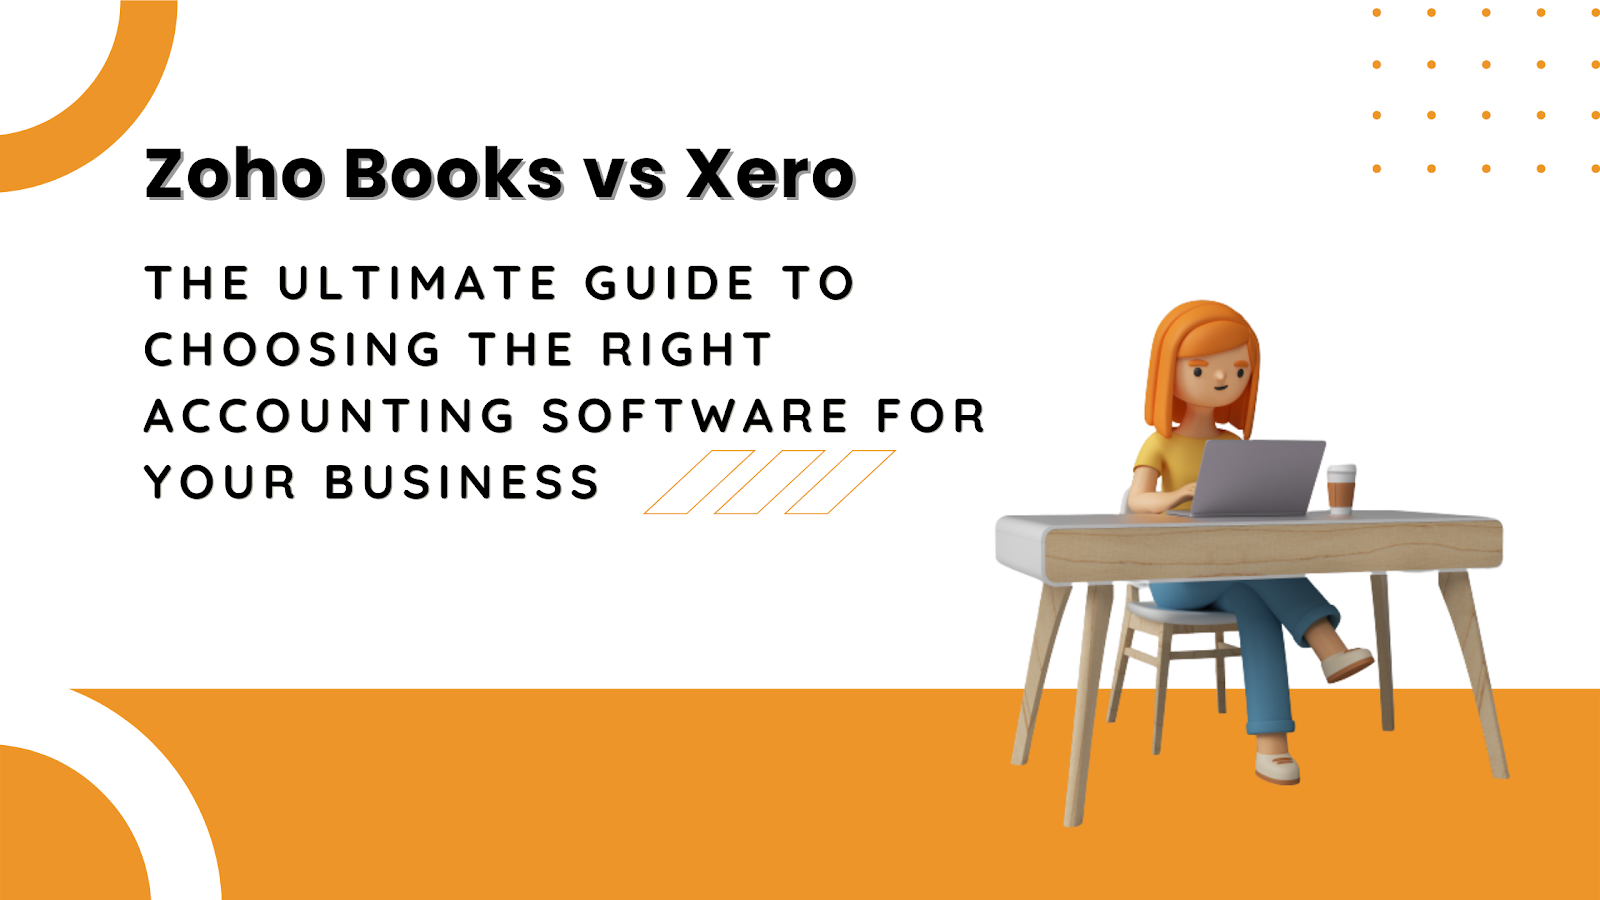 How to Choose the Right Accounting Software for Your Business: An Ultimate Guide